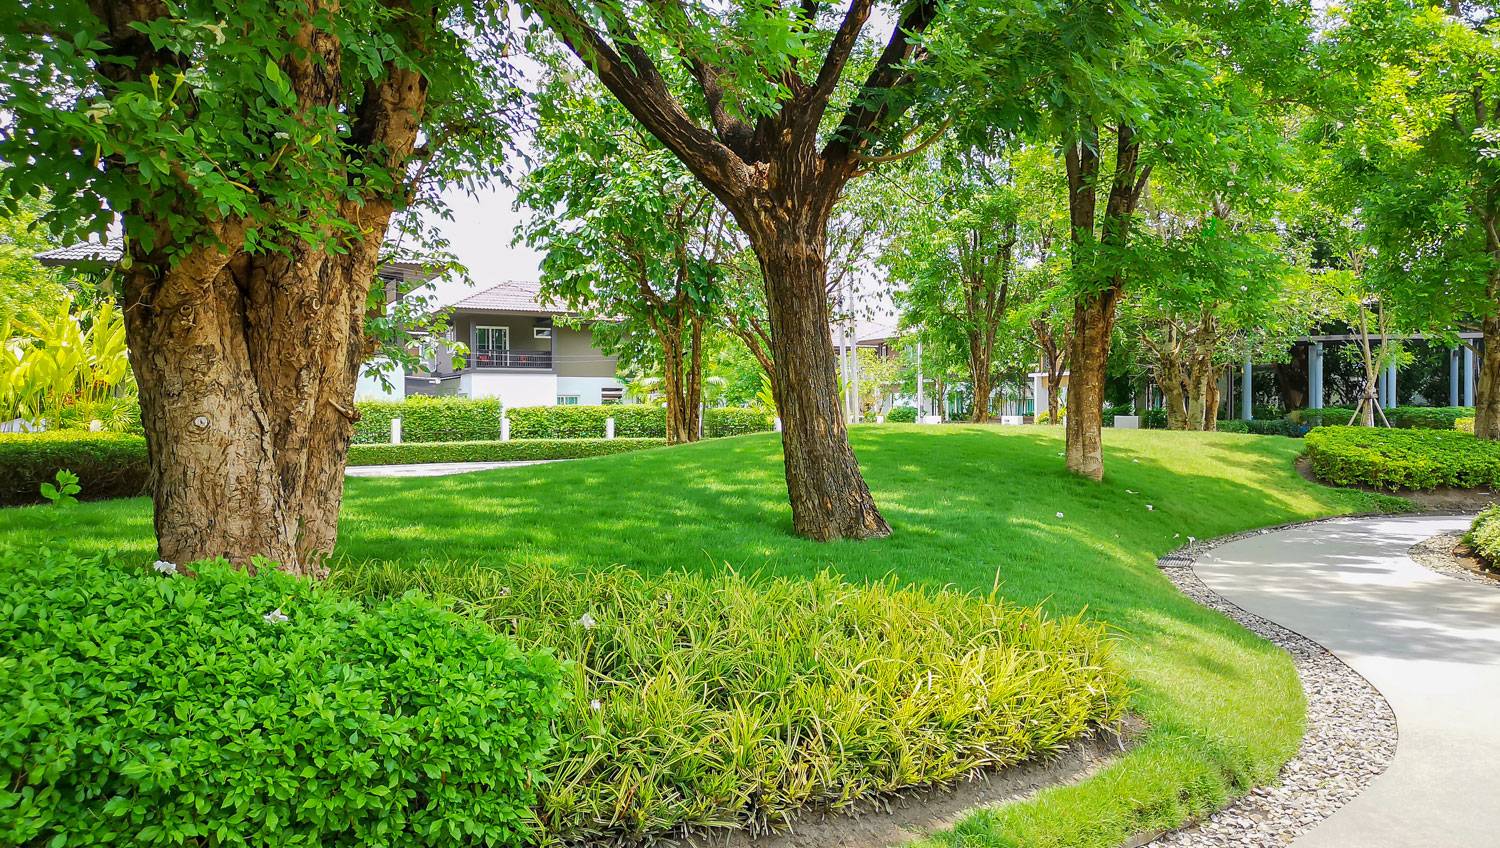 Smooth green grass lawn, greenery trees and shrub